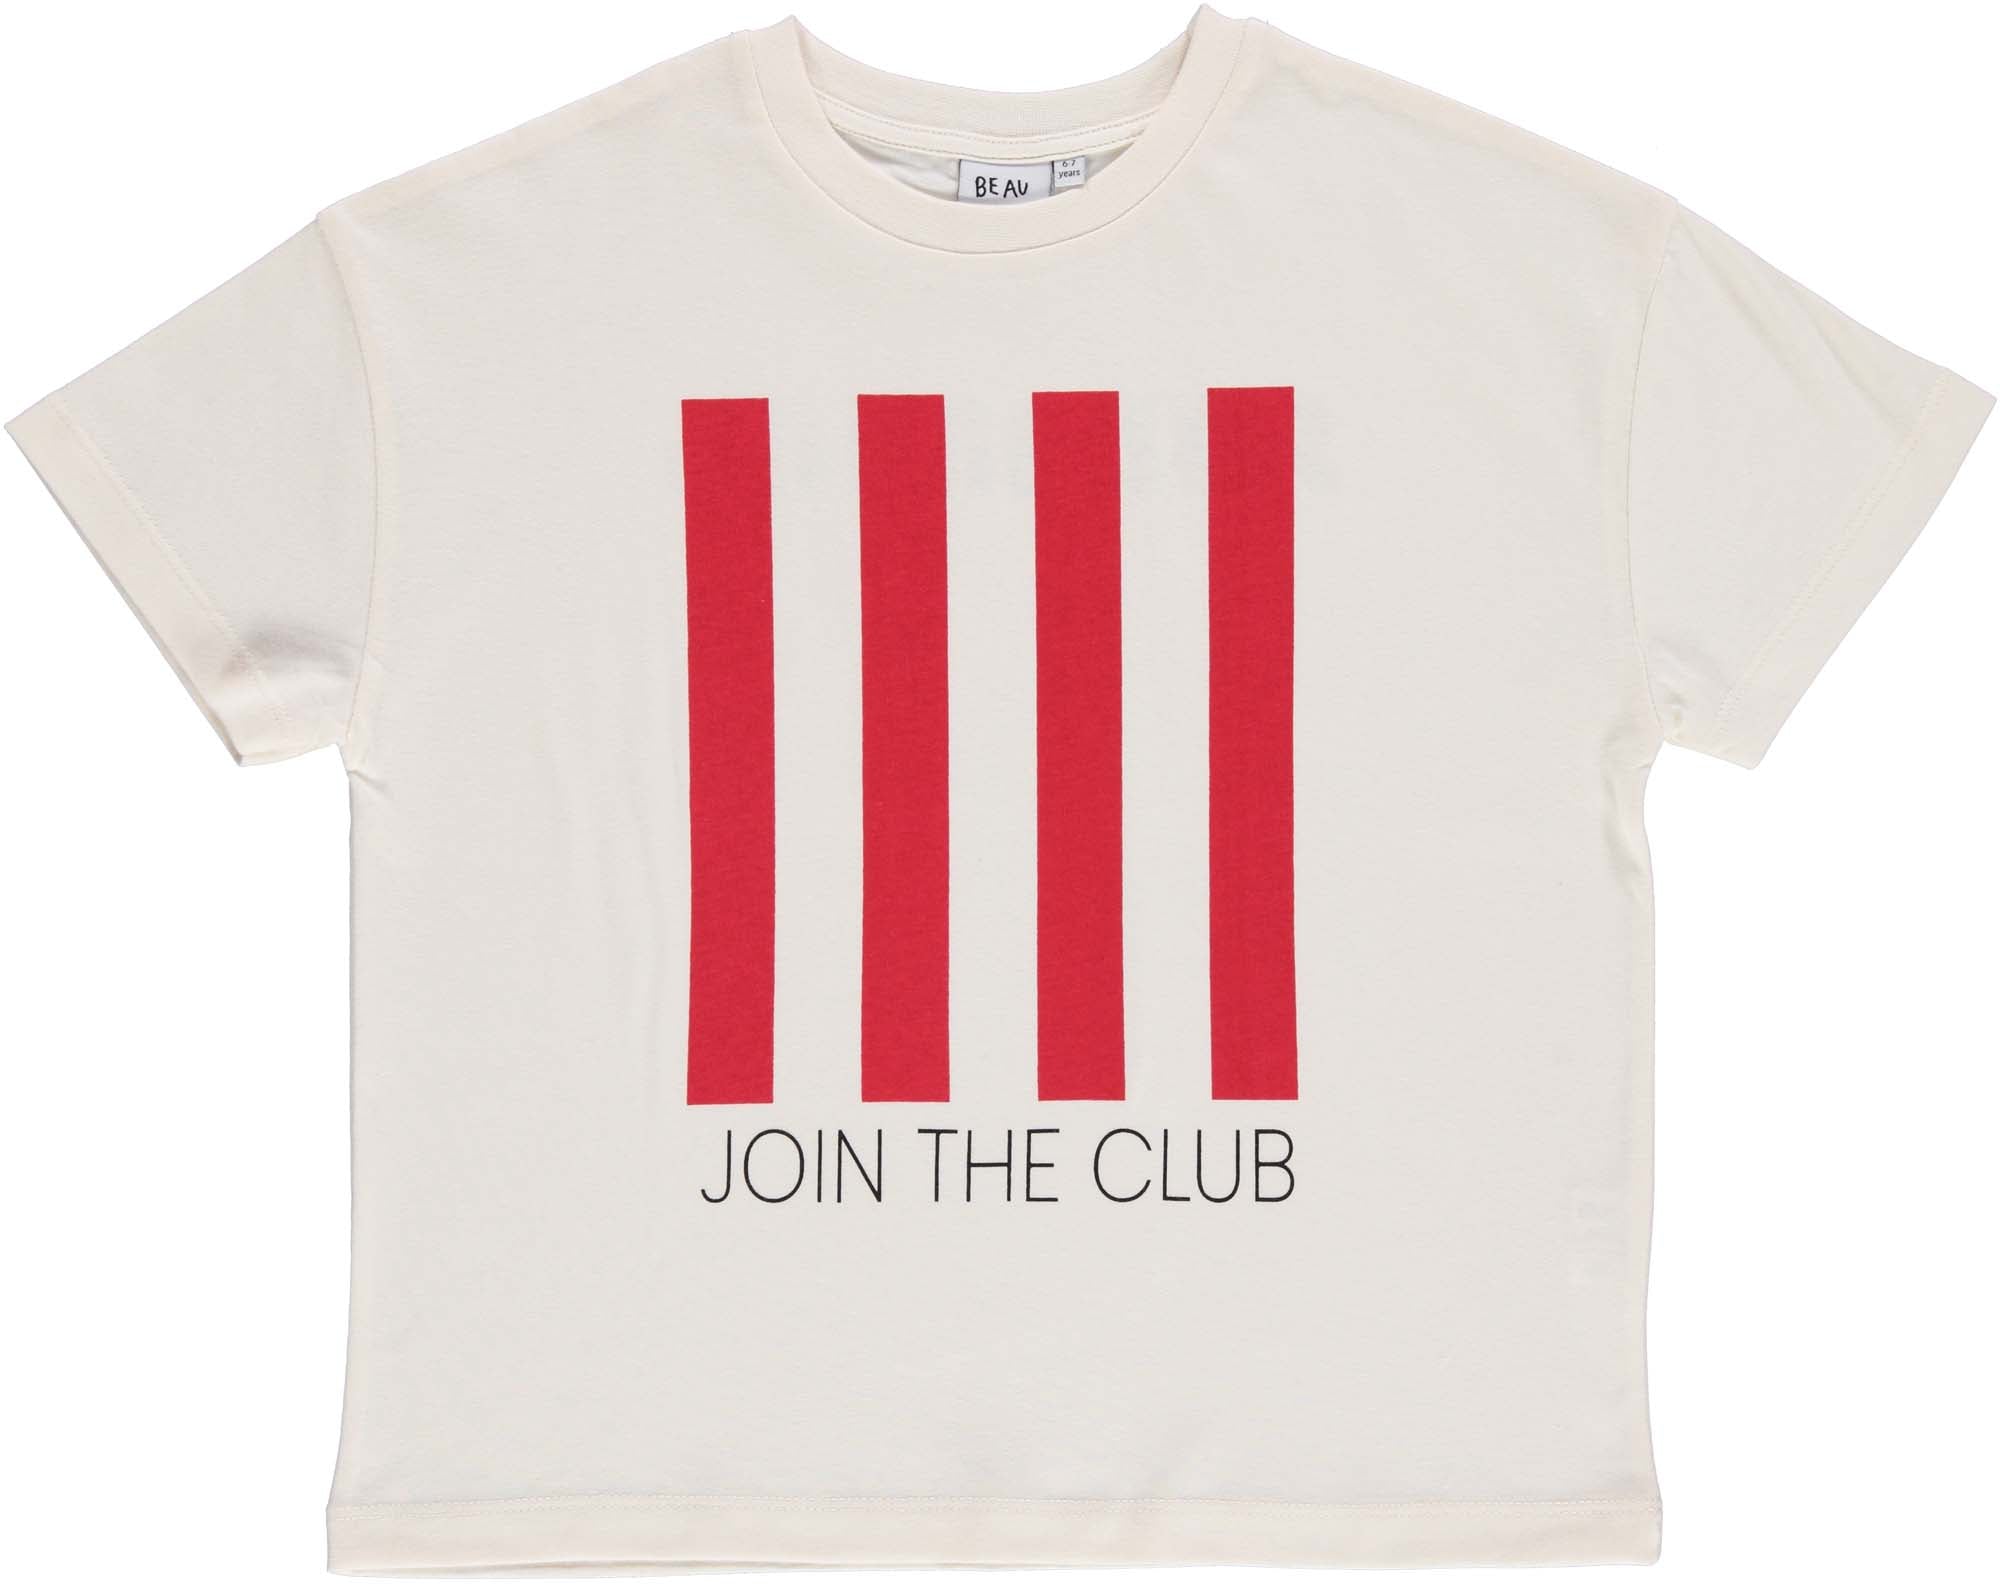 Antique White 'Join The Club' T-shirt BL025